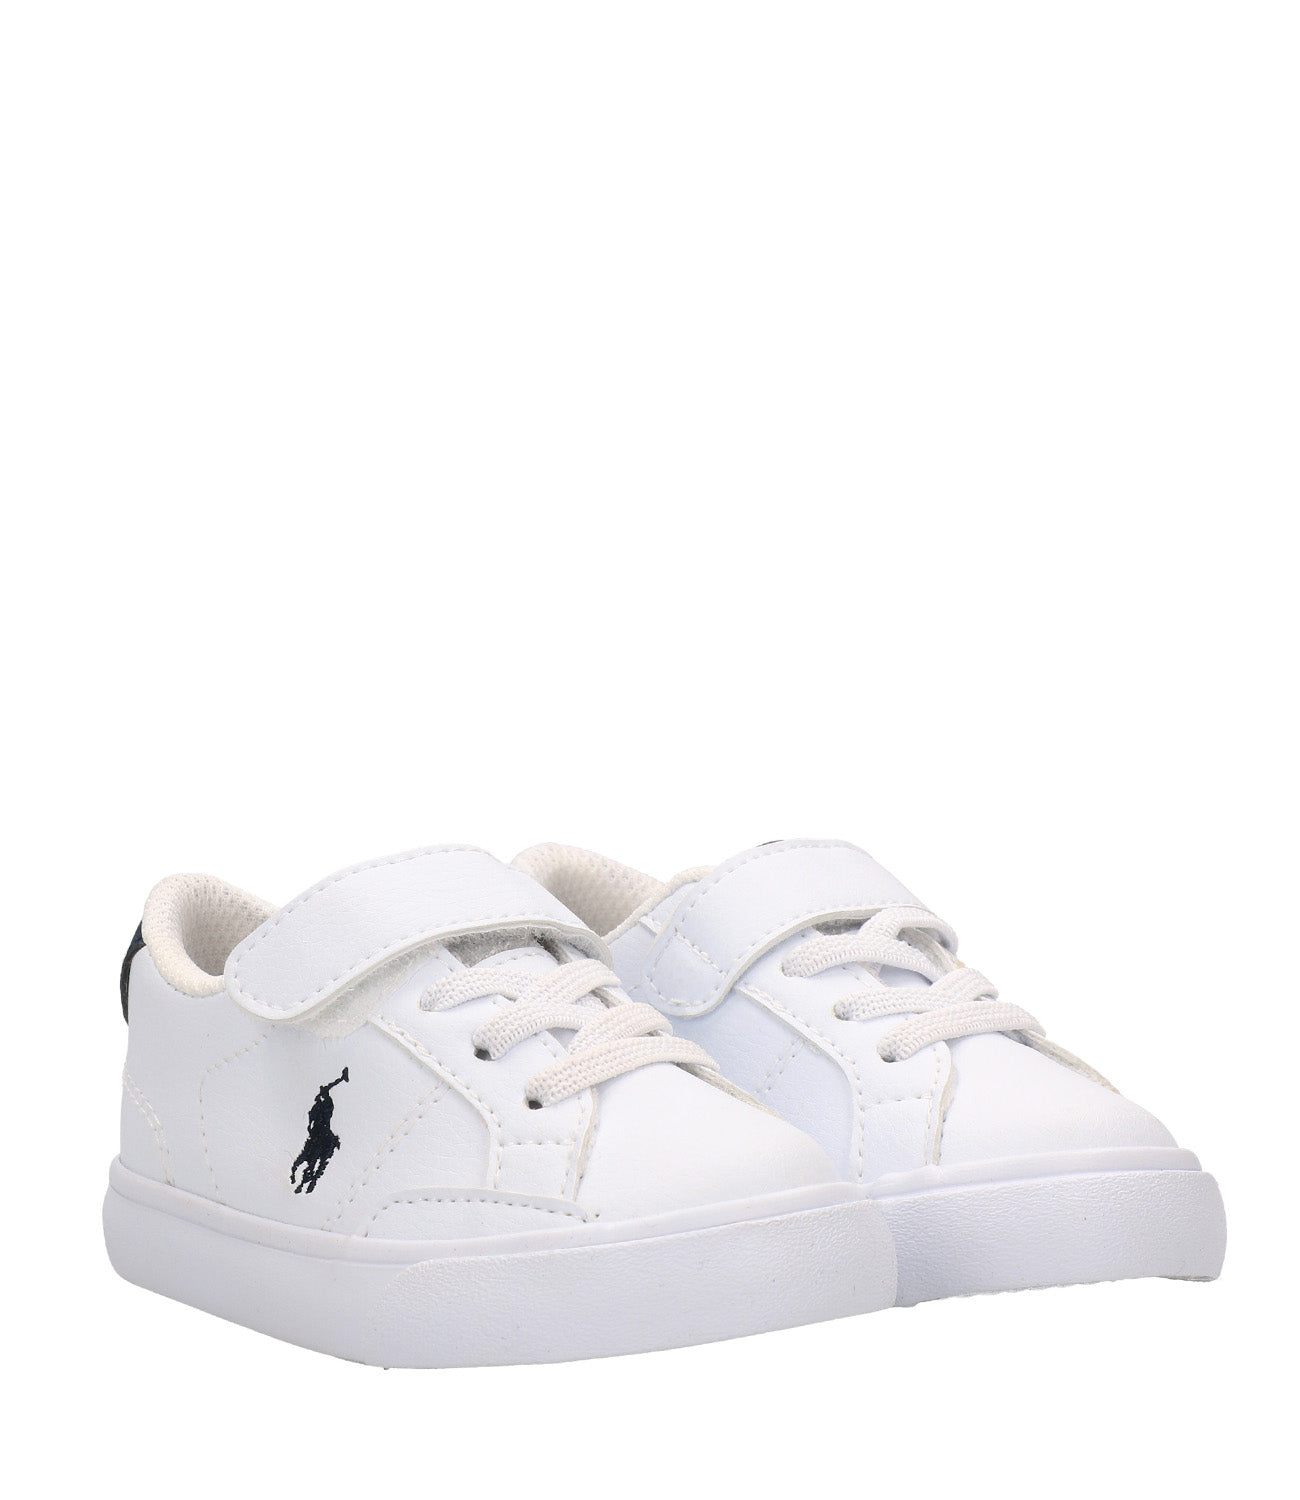 Ralph Lauren Childrenswear | Sneakers White and Navy Blue